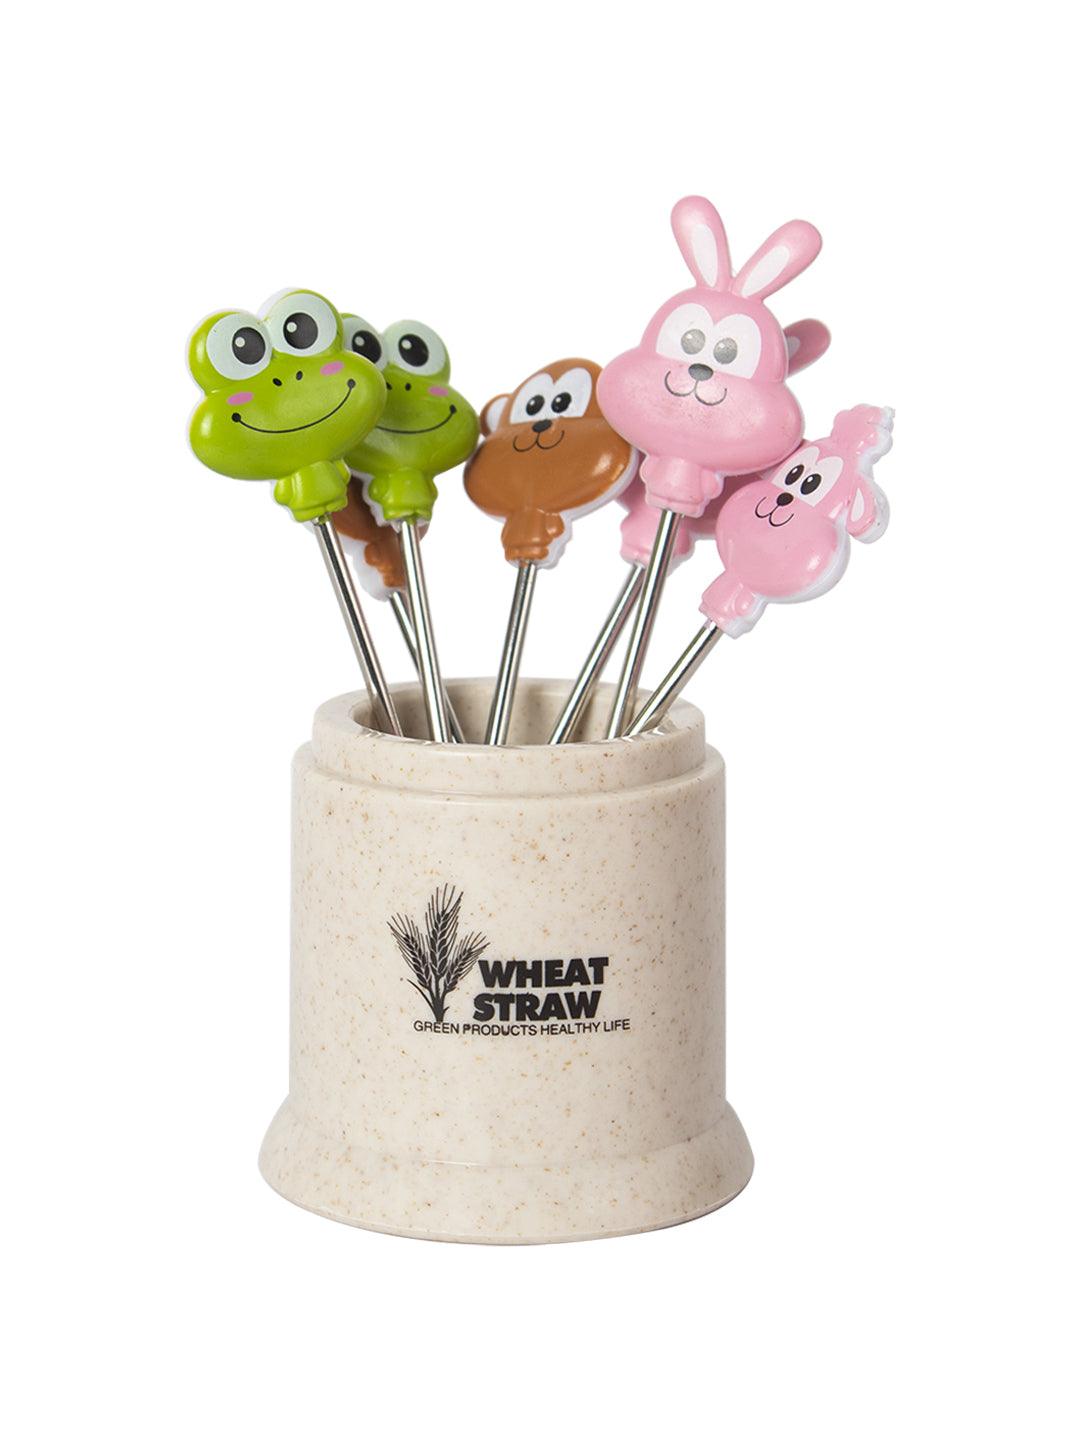 Colorful Plastic Fruit Forks with Adorable Animal Faces - Pack of 7 - MARKET 99